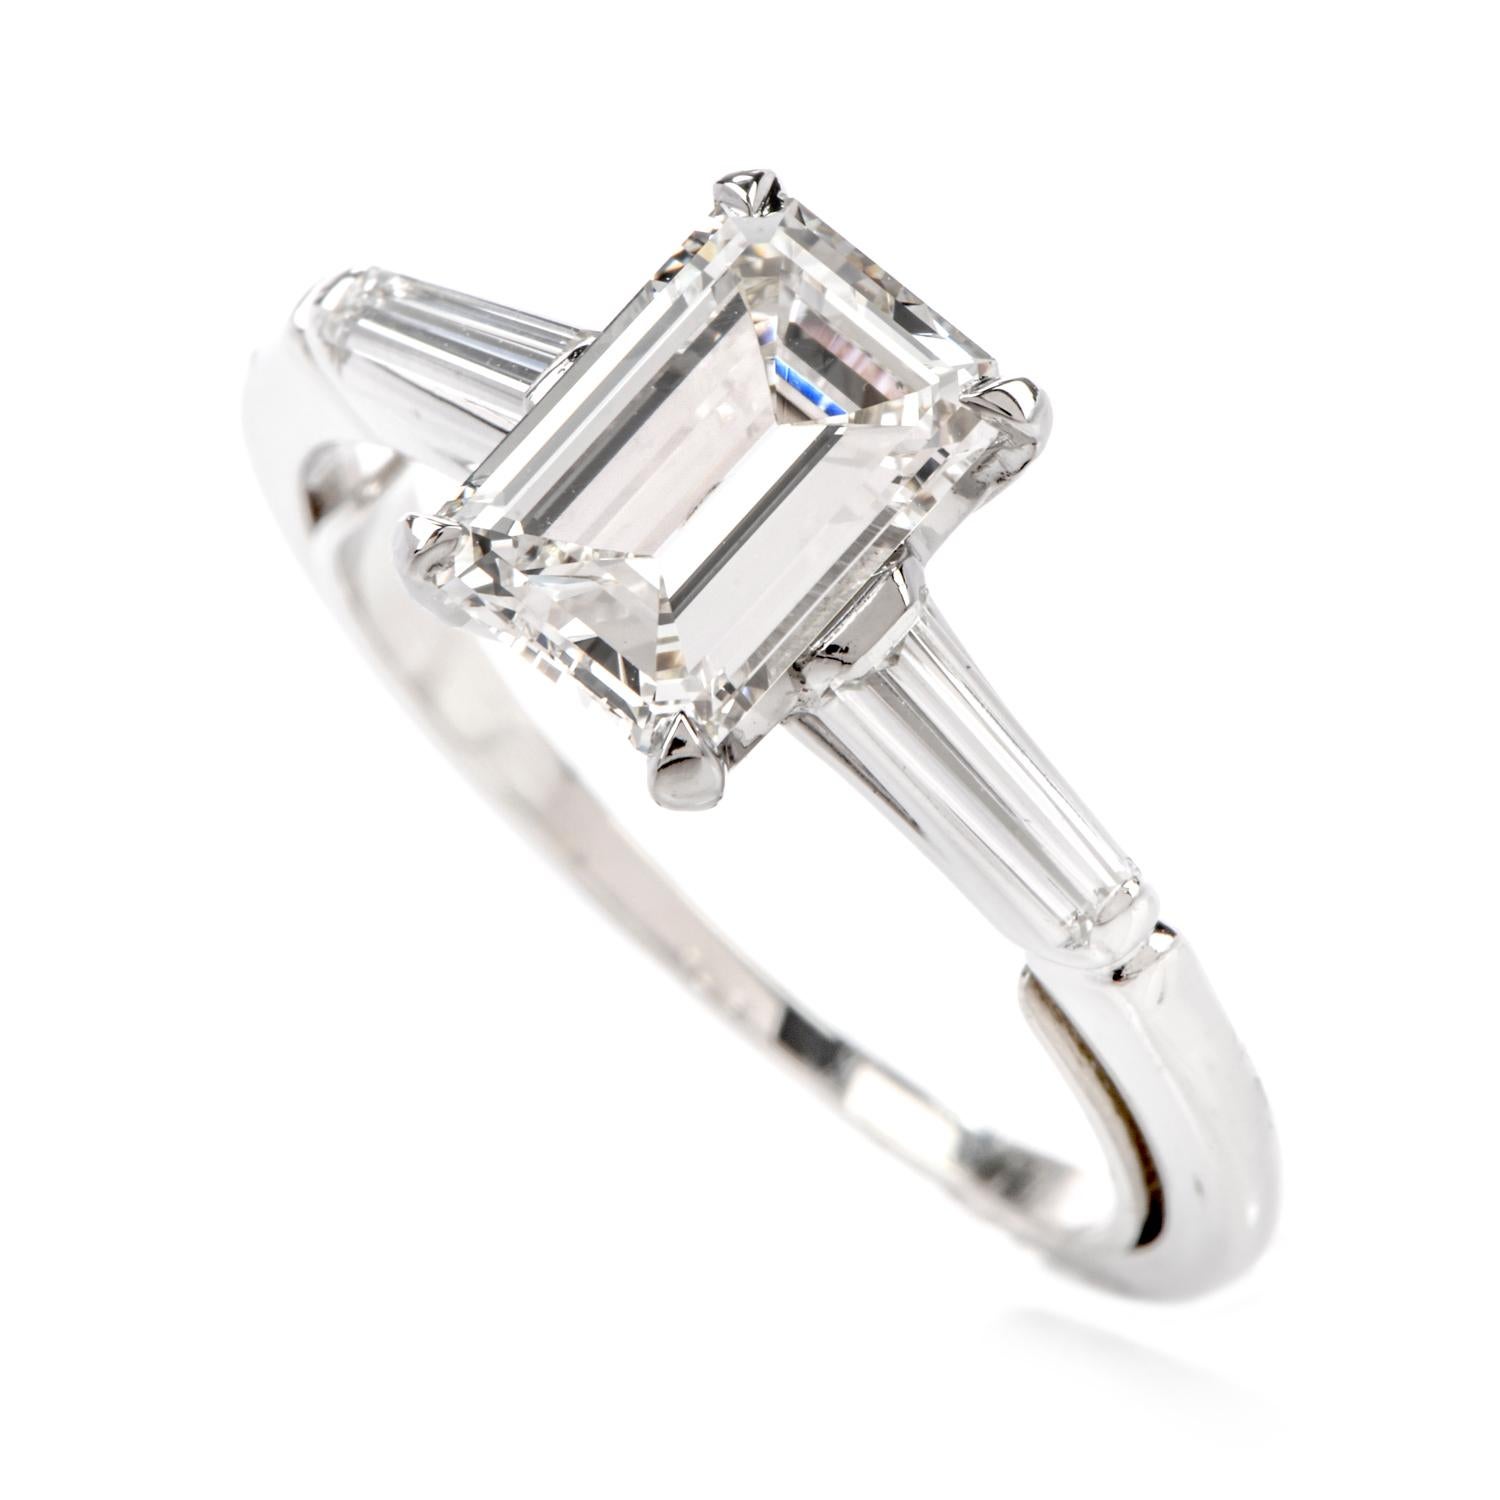 This classic 3 stone Engagement ring will help you commemorate

when 2 lives united to become one!

Crafted in Luxurious Platinum, this ring features a centered

appx. 1.41 carat Emerald cut Diamond of appx. H-I color and VS2 clarity.

Flanking from